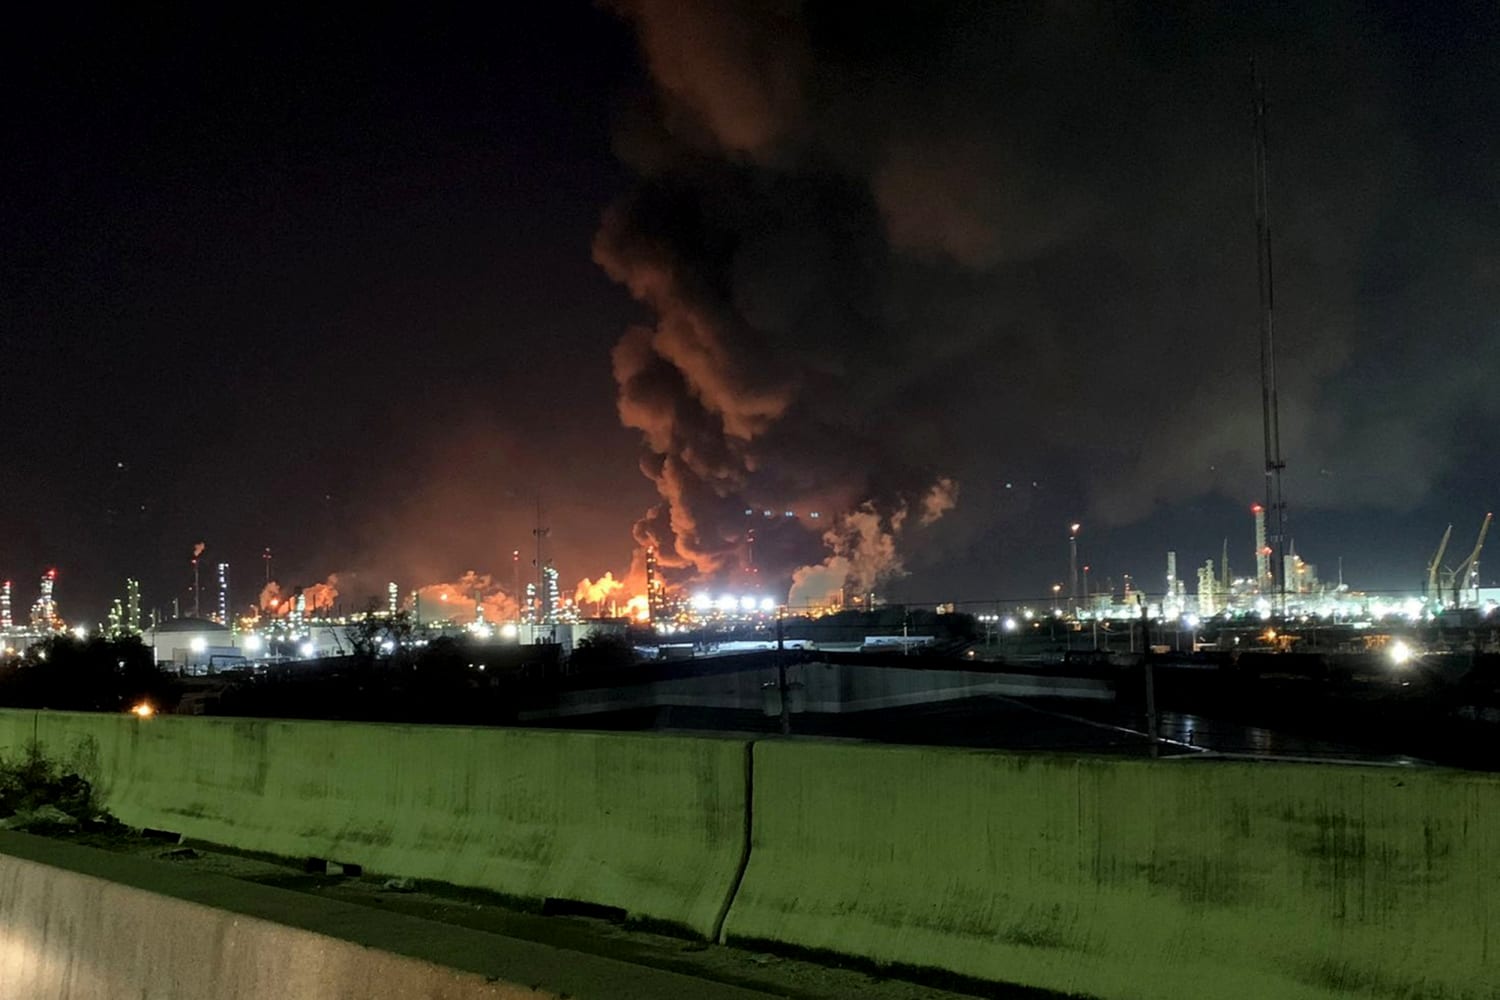 Several people injured after fire at Exxon oil refinery in Texas